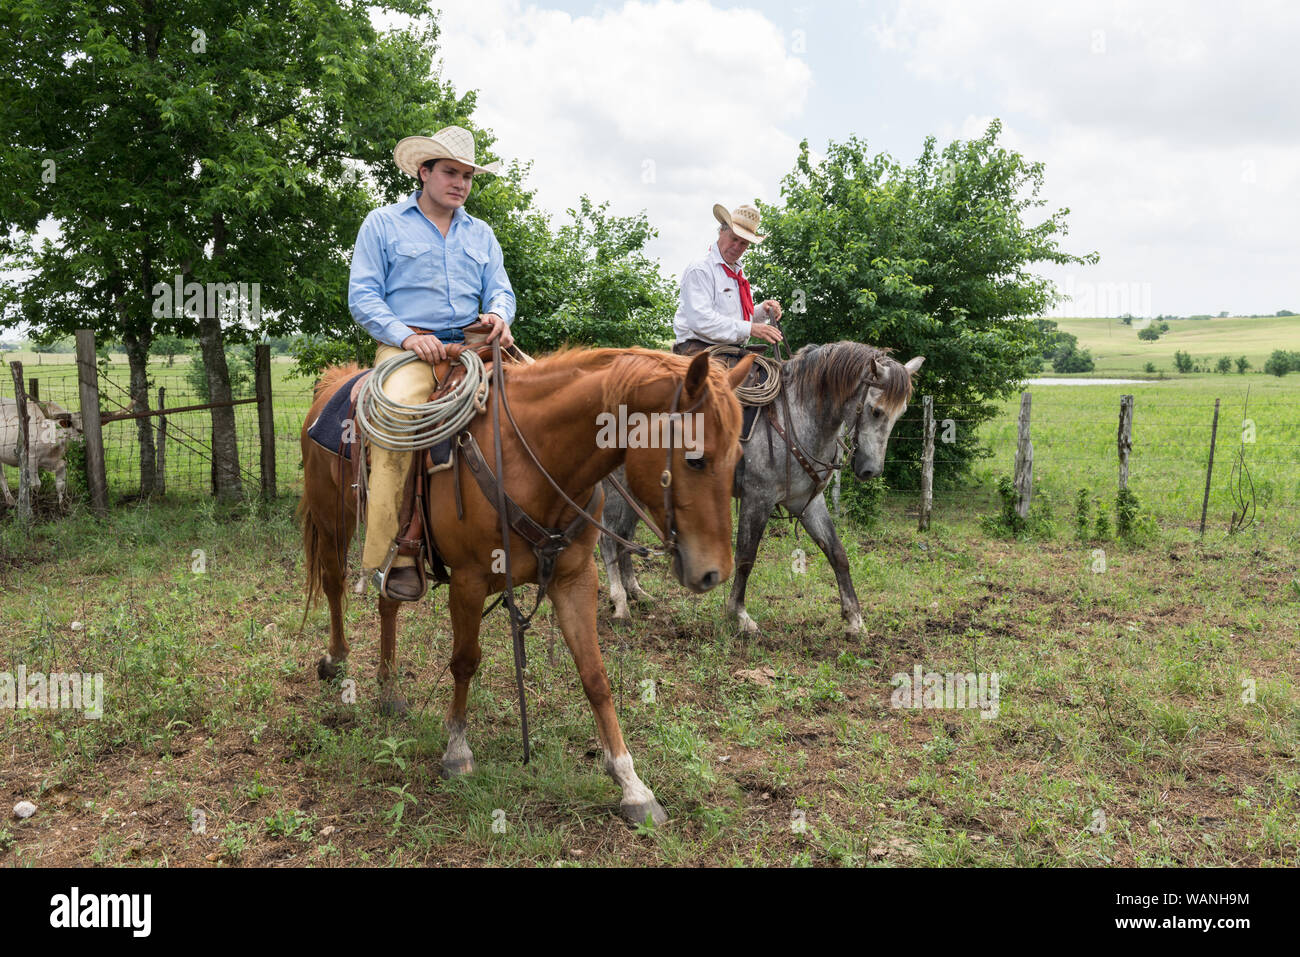 Cowhand Lars Hollis, left, and John Elick, owner of the 1,800-acre Lonesome Pine Ranch, a working cattle ranch that is part of the Texas Ranch Life ranch resort near Chappell Hill in Austin County, Texas. Hollis's horse is named Catote; Elick's is Rebelito Stock Photo